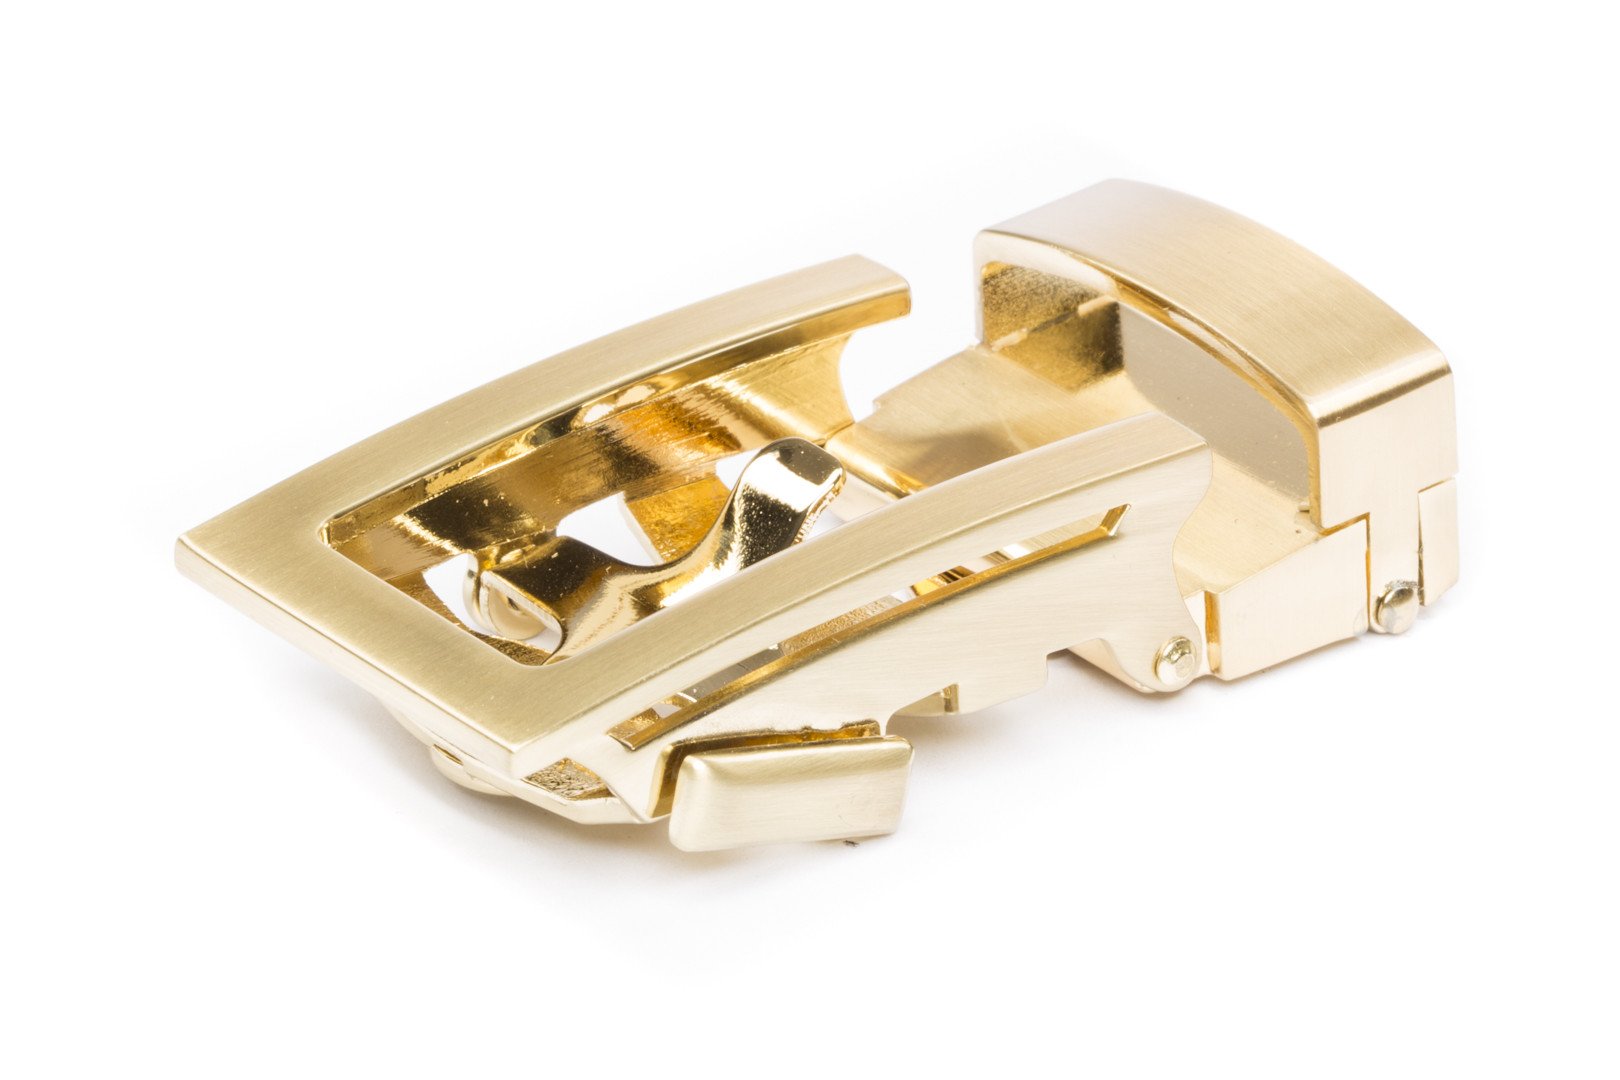 Men's traditional ratchet belt buckle in gold with a 1.25-inch width, oblique view.